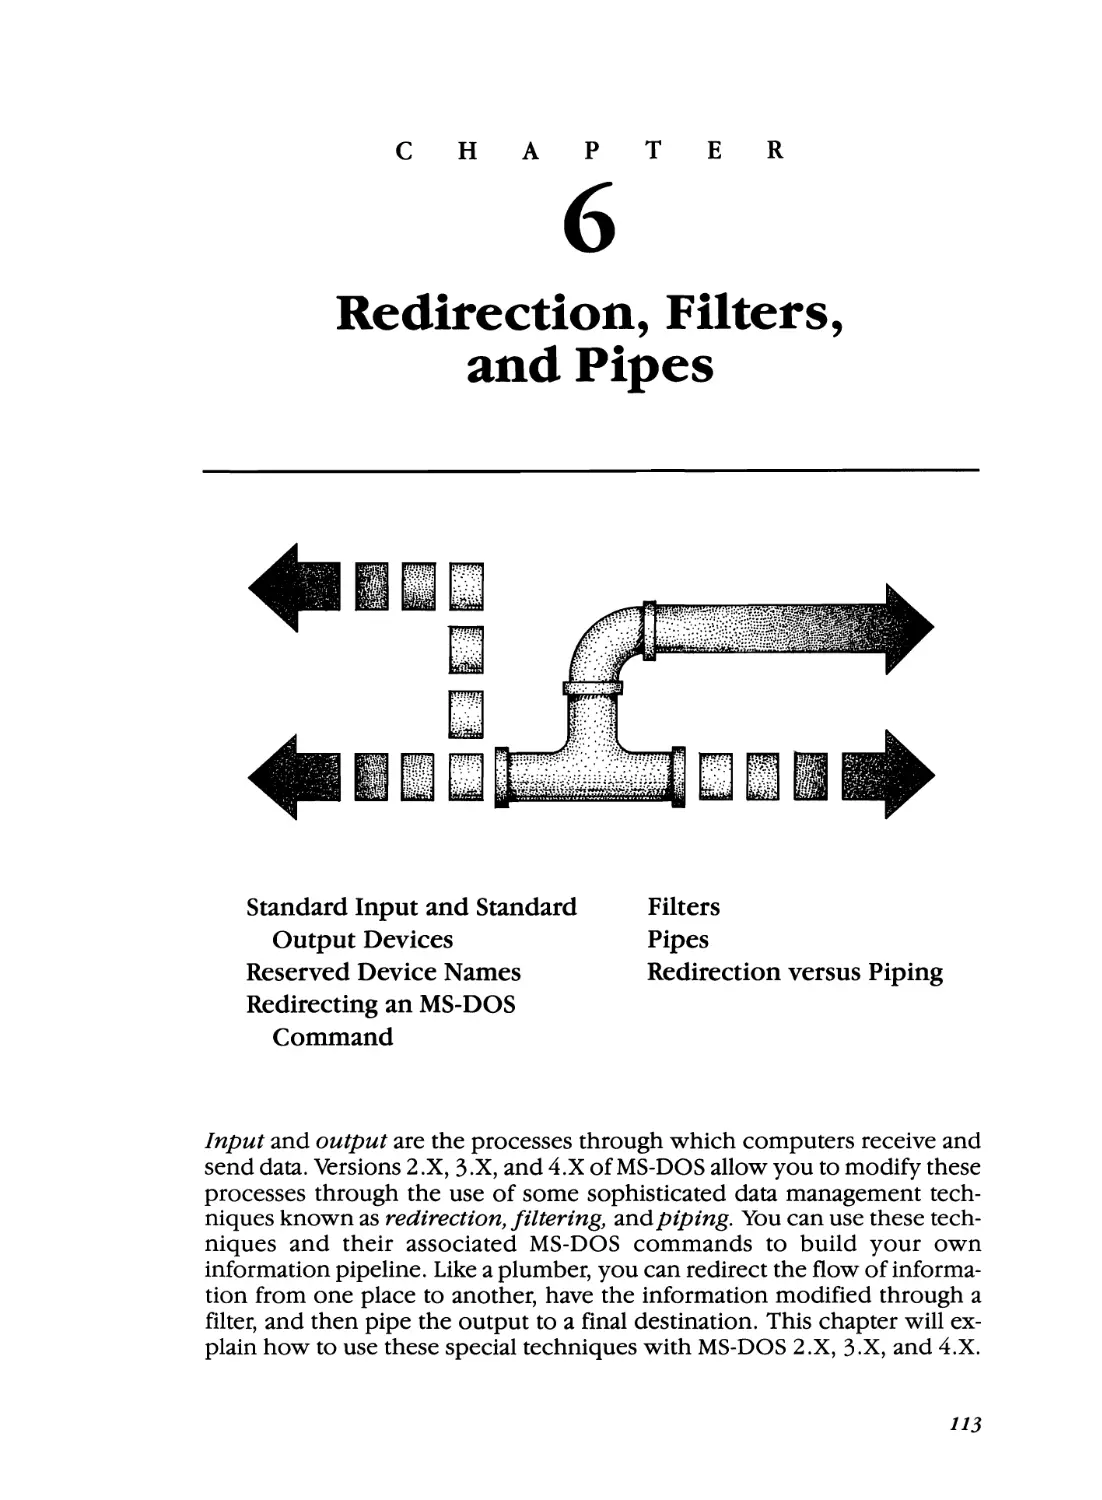 Chapter 6 - Redirection, Filters, and Pipes